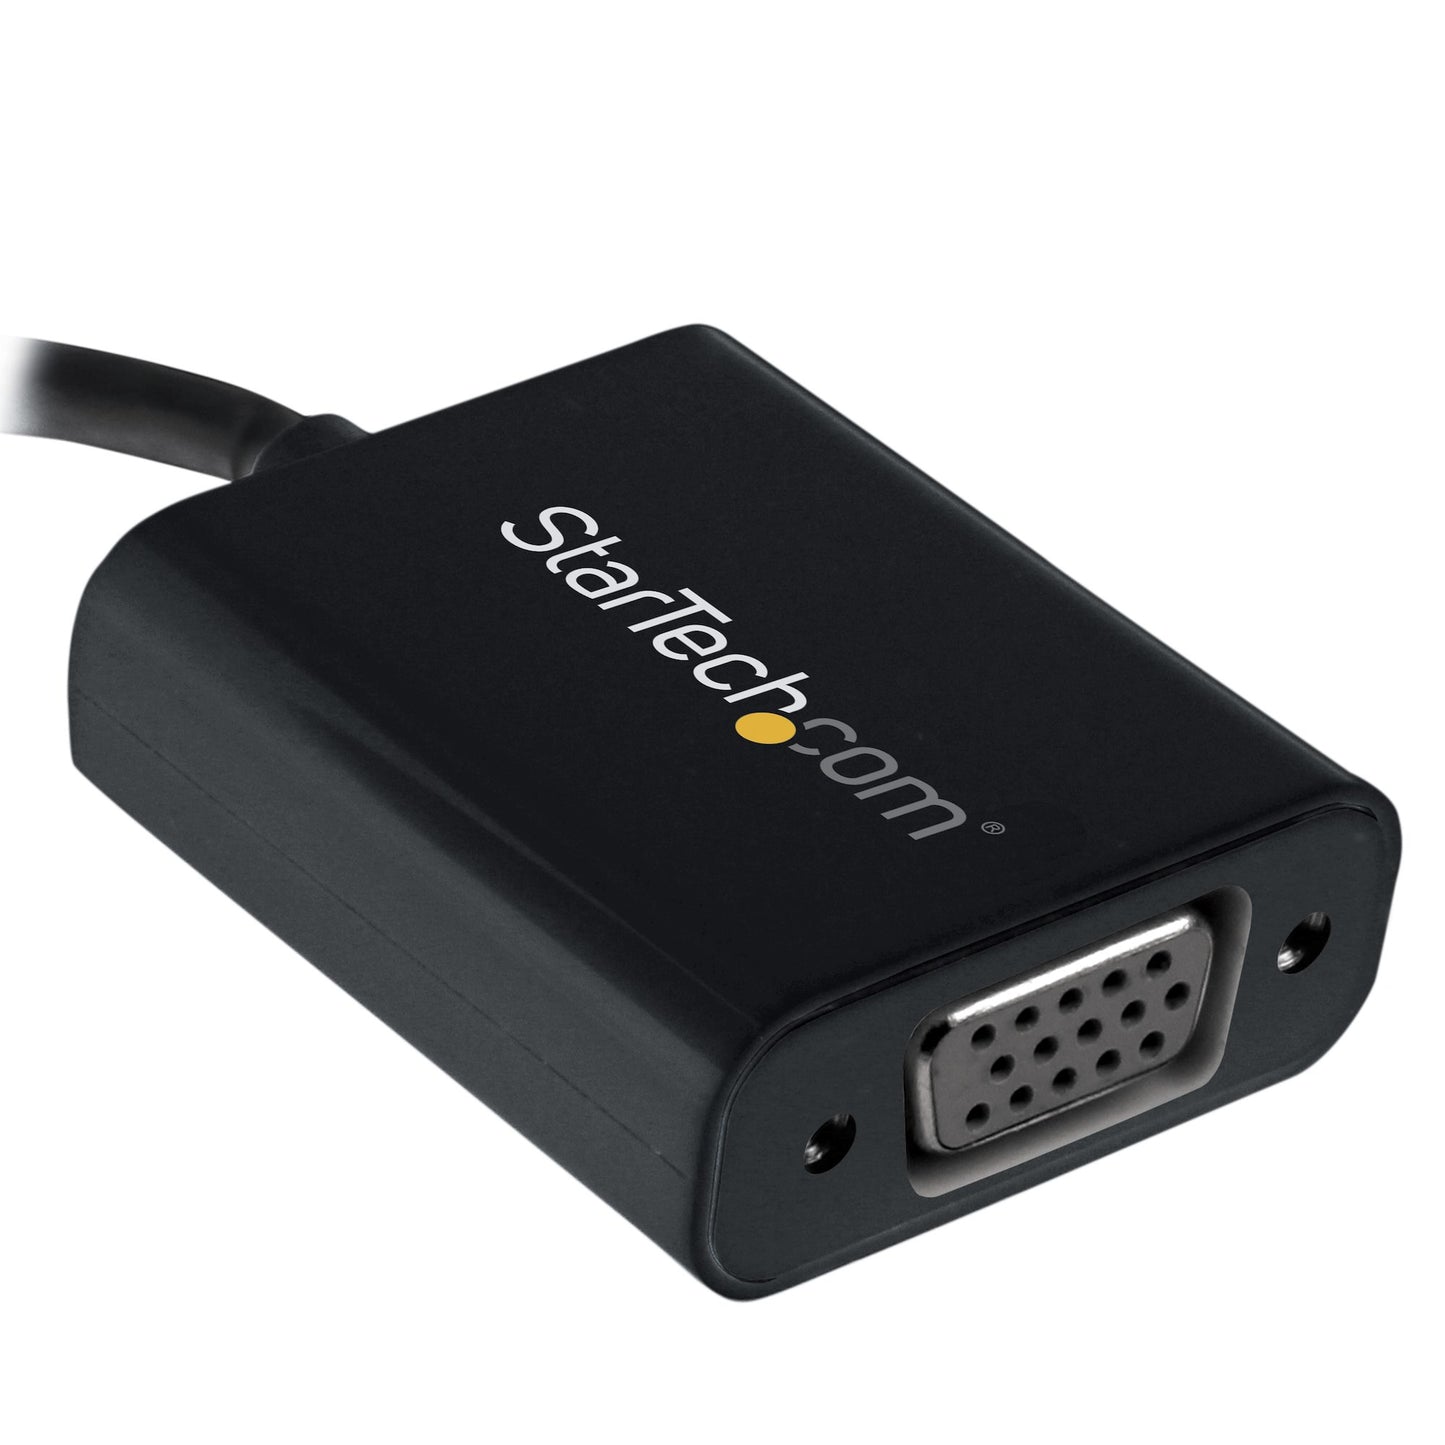 StarTech.com USB-C to VGA Adapter - Black - 1080p - Video Converter For Your MacBook Pro - USB C to VGA Display Dongle - Upgraded Version is CDP2VGAEC-2